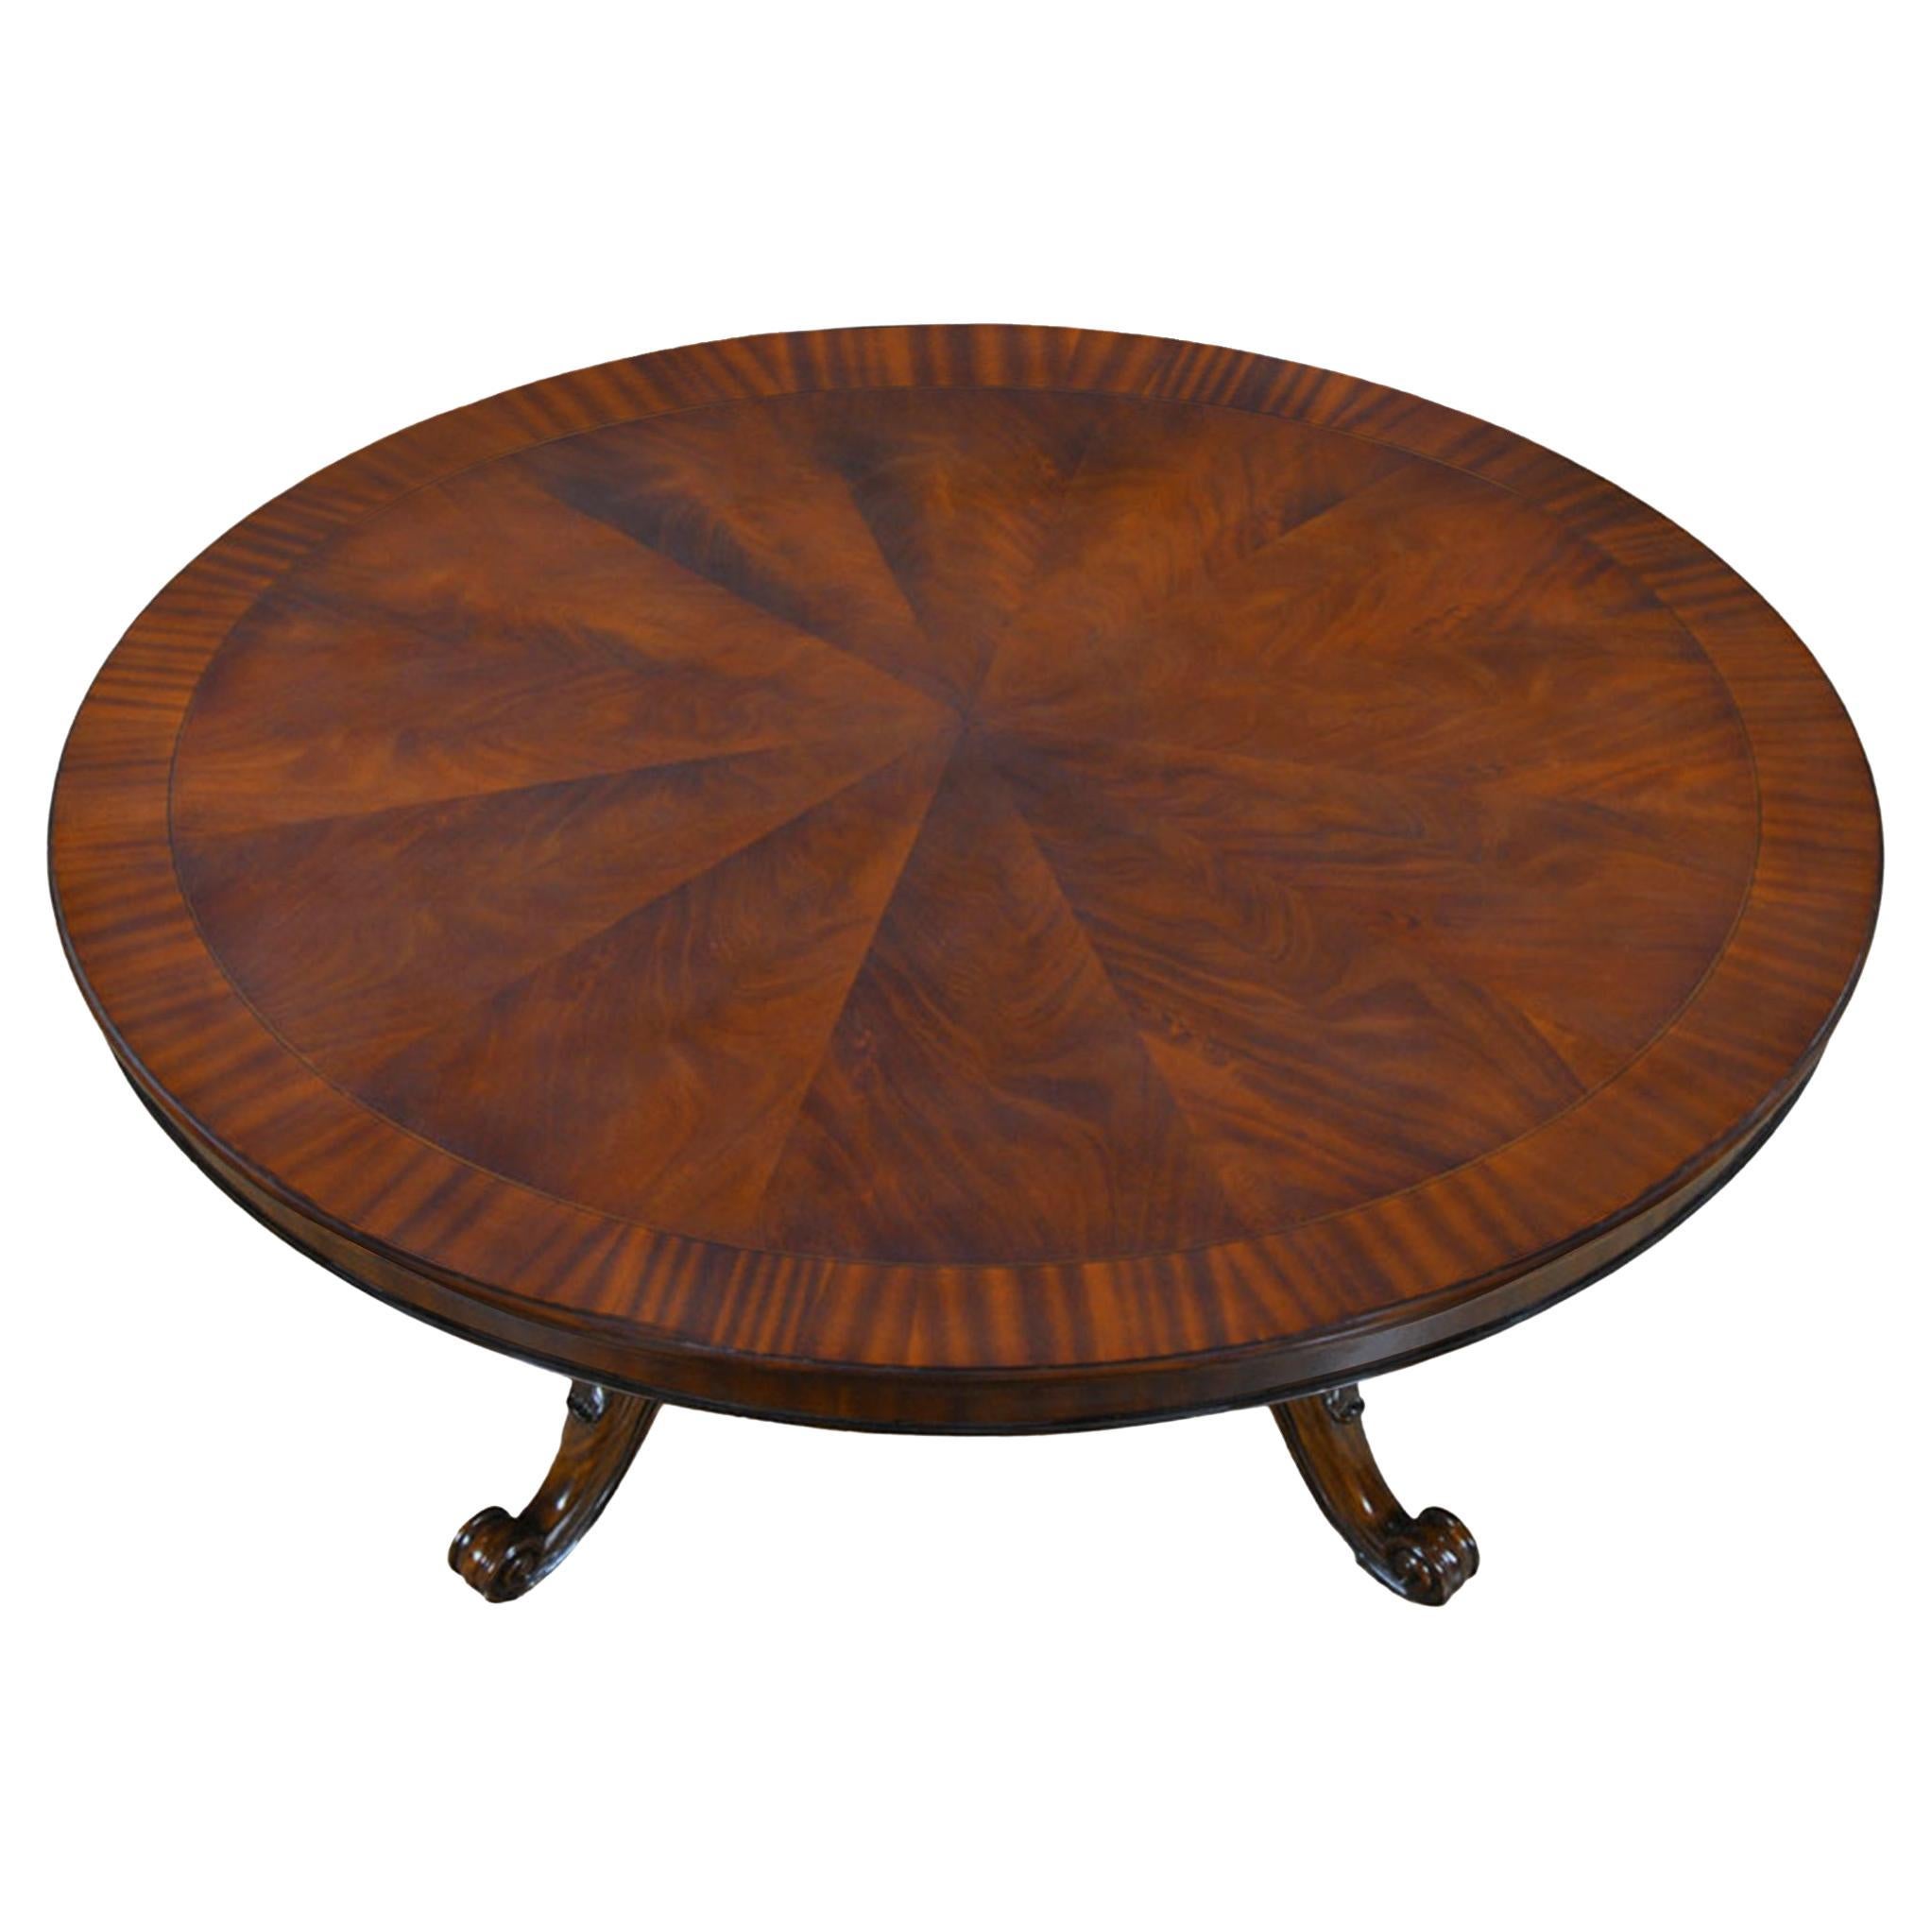 72 inch Round Table For Sale